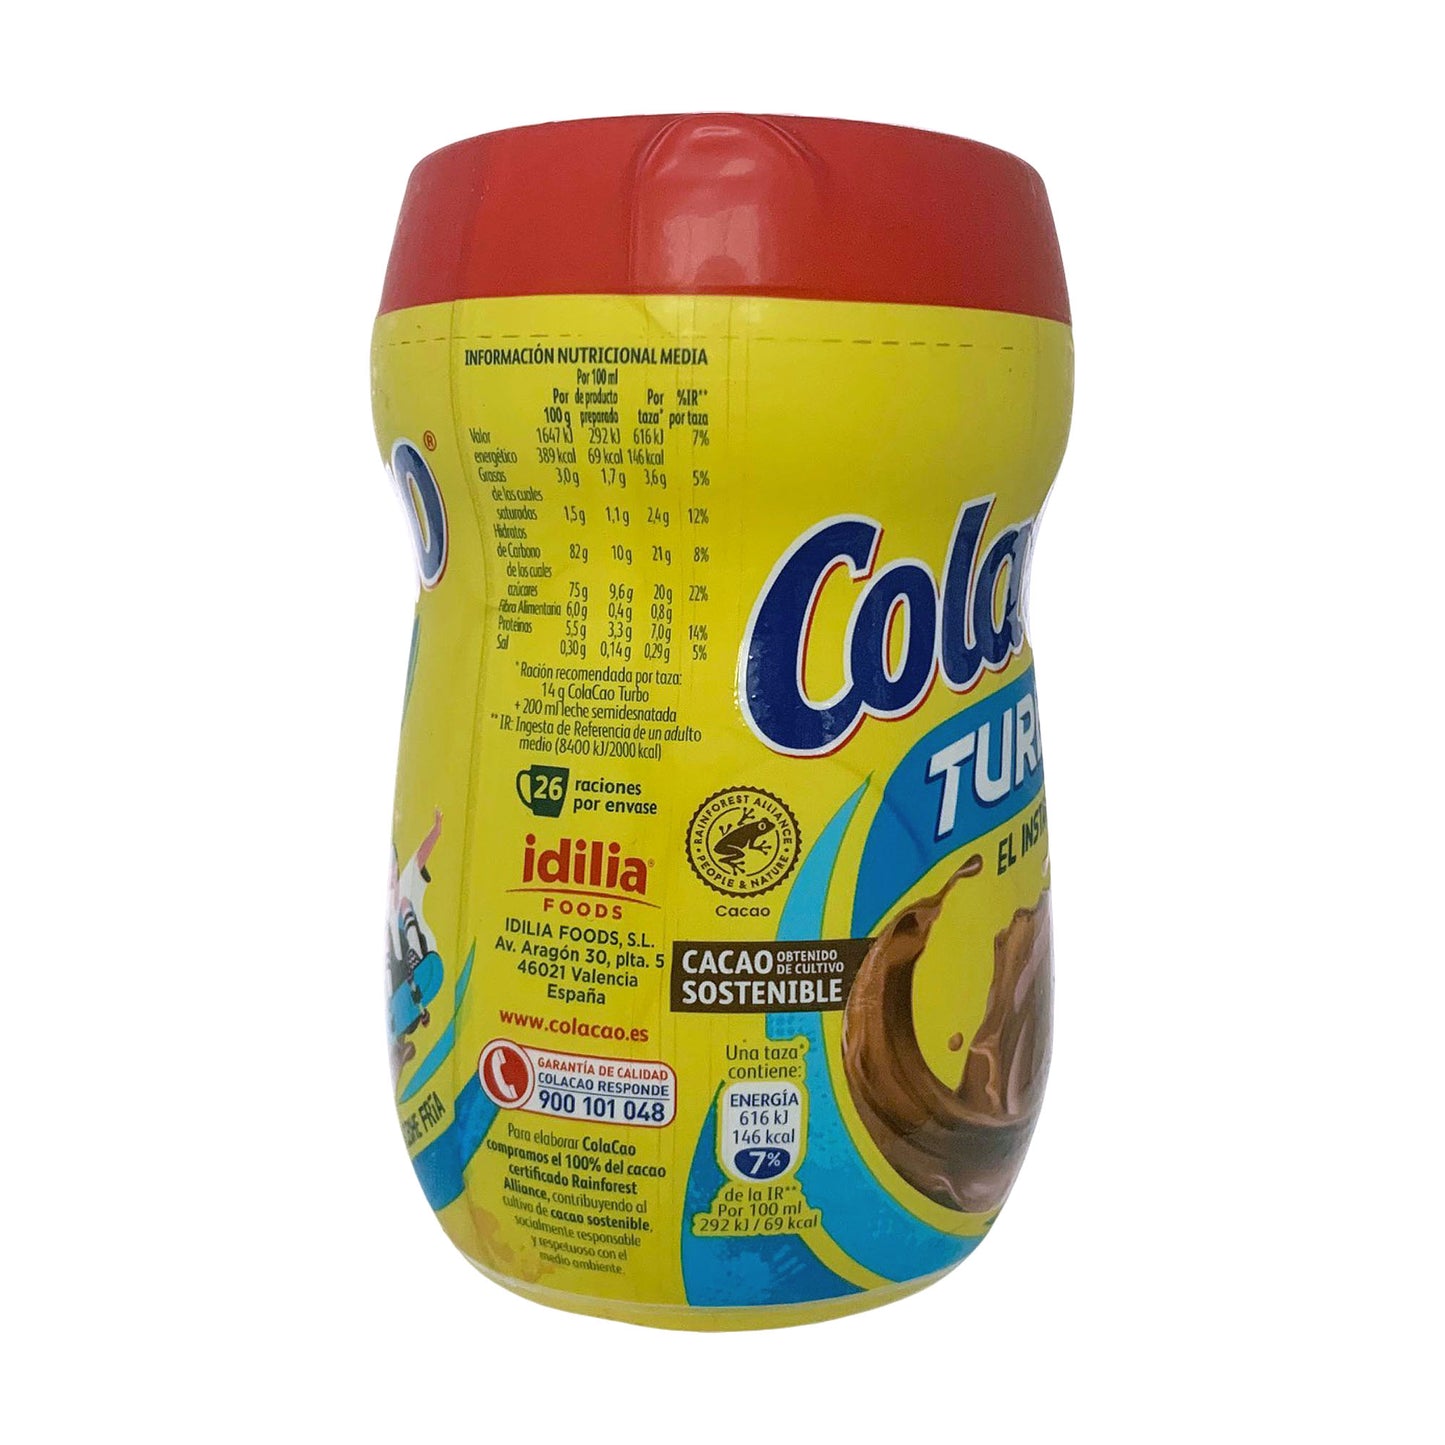 ColaCao Turbo Instant Hot or Cold Chocolate Drink Mix from Spain